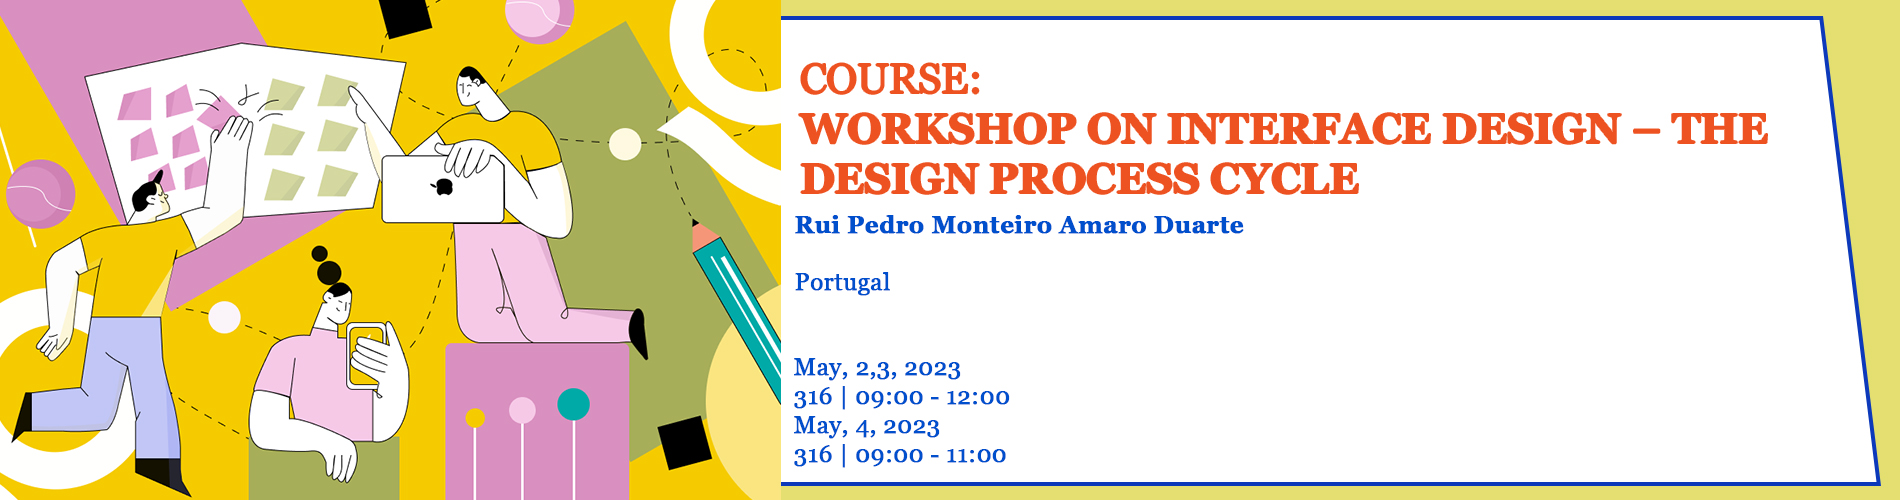 2023052-_2023054_-_Workshop_on_Interface_Design__The_Design_Process_Cycle